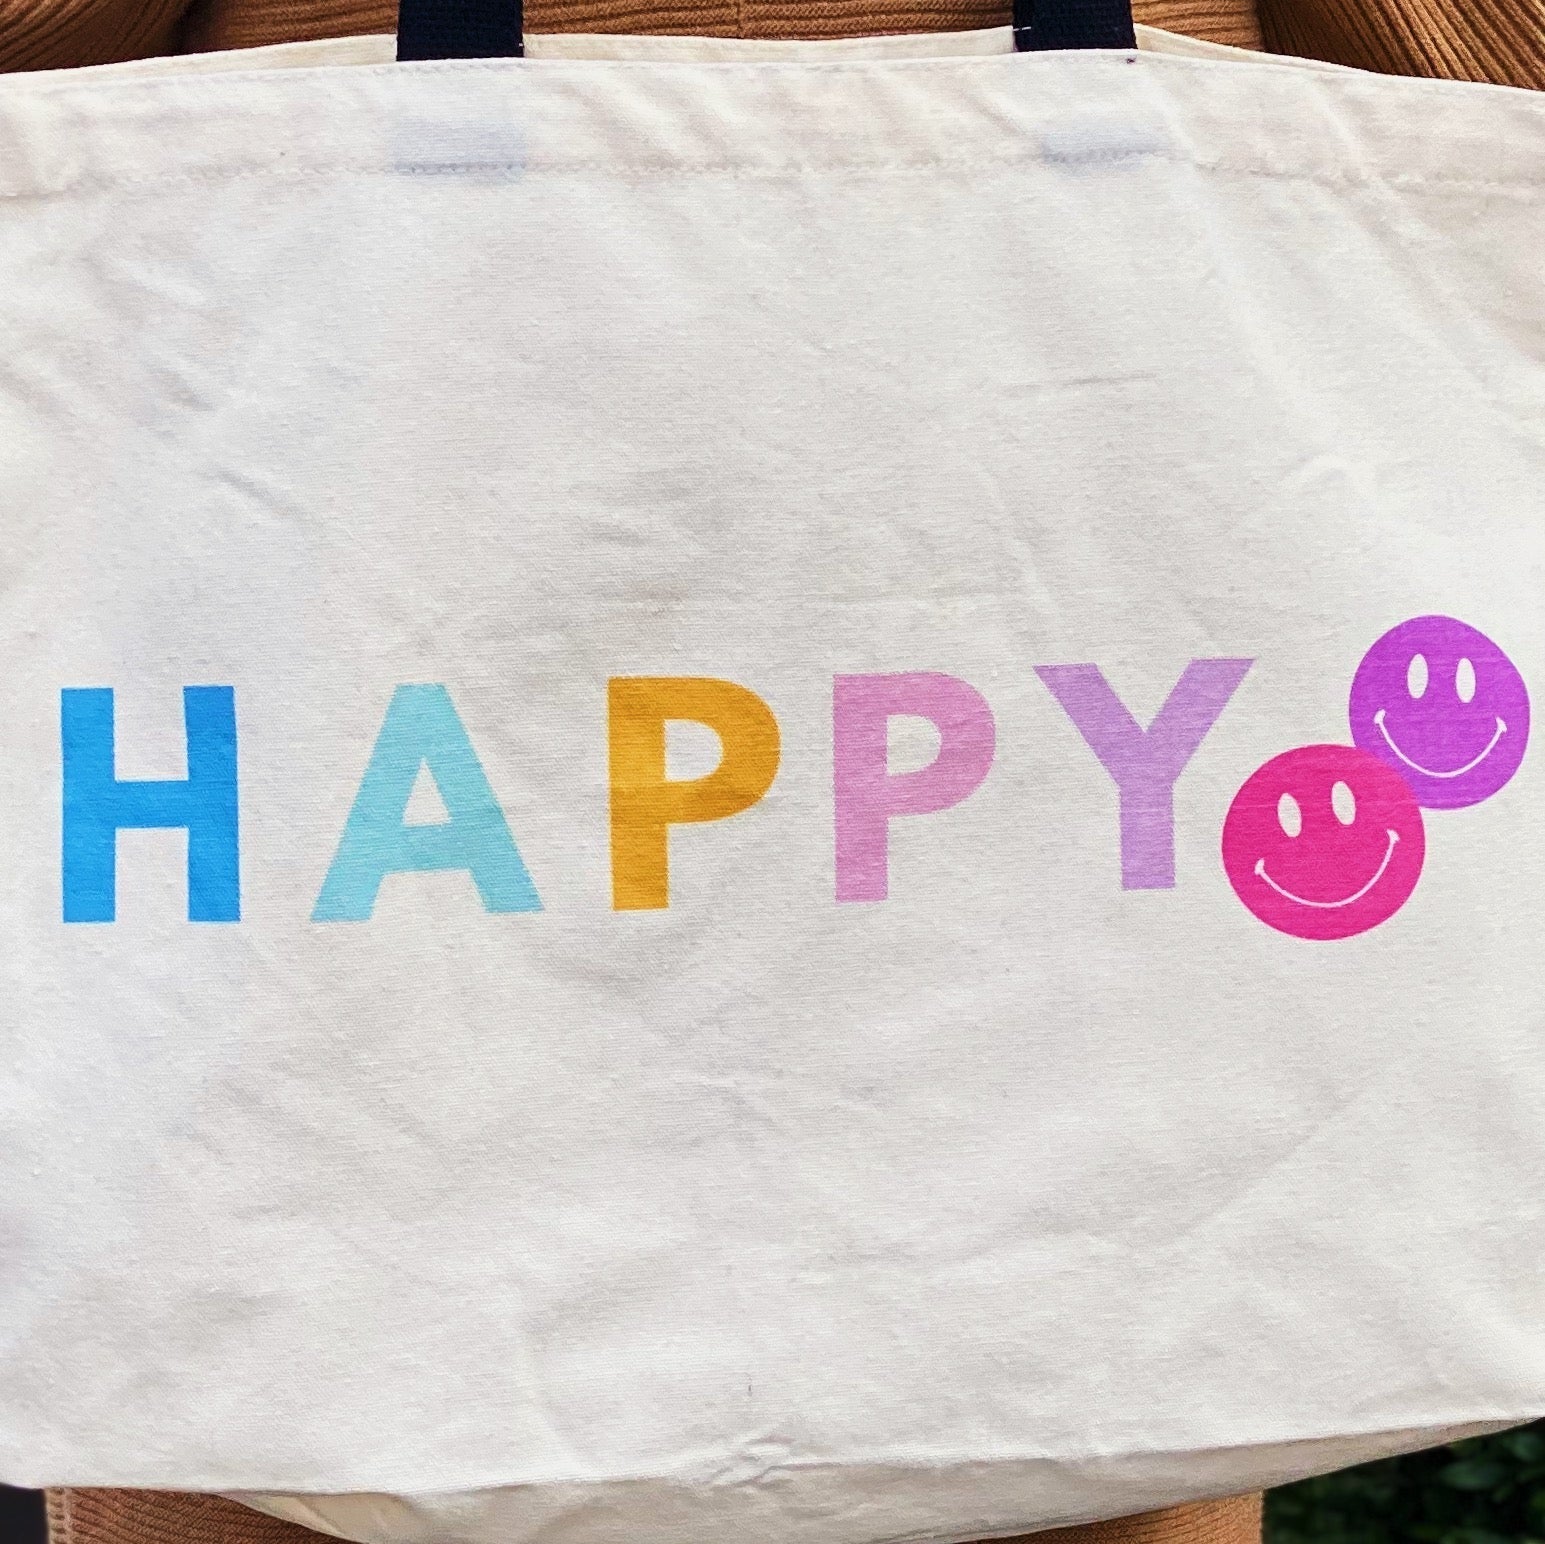 Happy And Smiley Face Canvas Tote - The Kindness Cause